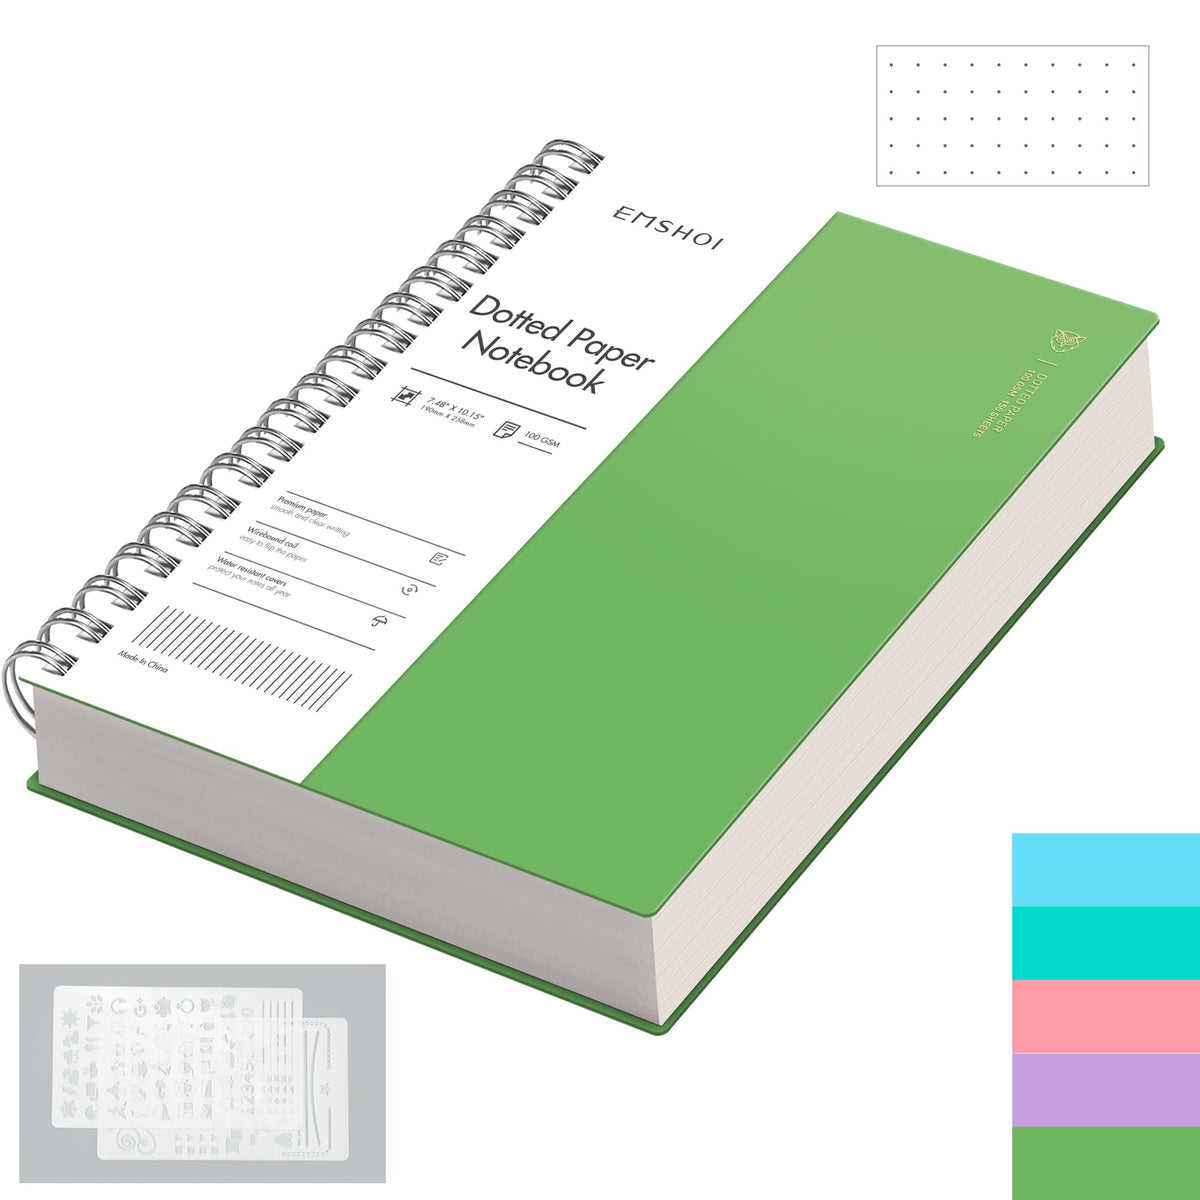 EMSHOI B5 Spiral Notebook Bullet Dotted Journal, 300 Pages/150 Sheets, 100gsm Dot Grid Paper, Waterproof Hardcover, Wirebound Notepad for Office School Women Men Work Writing,19 x 25 cm, Green